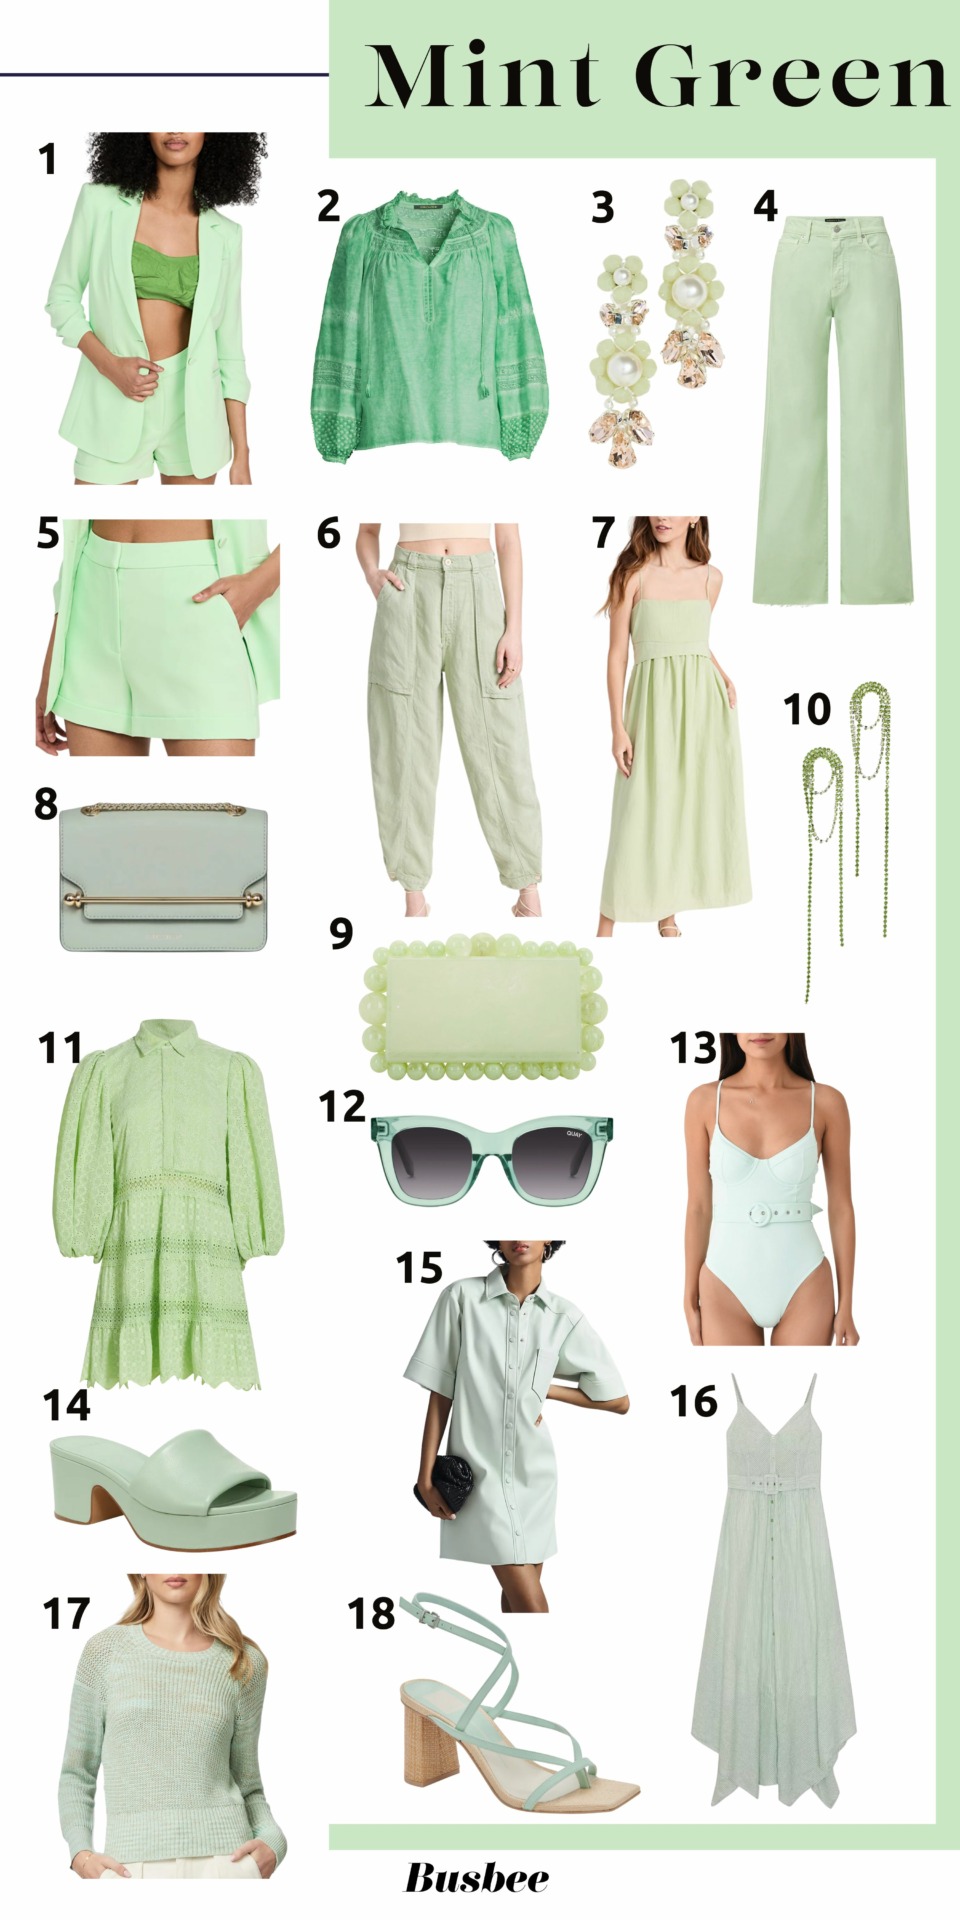 mint green spring fashion, mint green trend, color trend, mint green color trend, mint green fashion finds, mint green finds, mint green over 40, how to wear mint green, what colors go with mint green, best mint green fashion, erin busbee, busbee style, fashion over 40